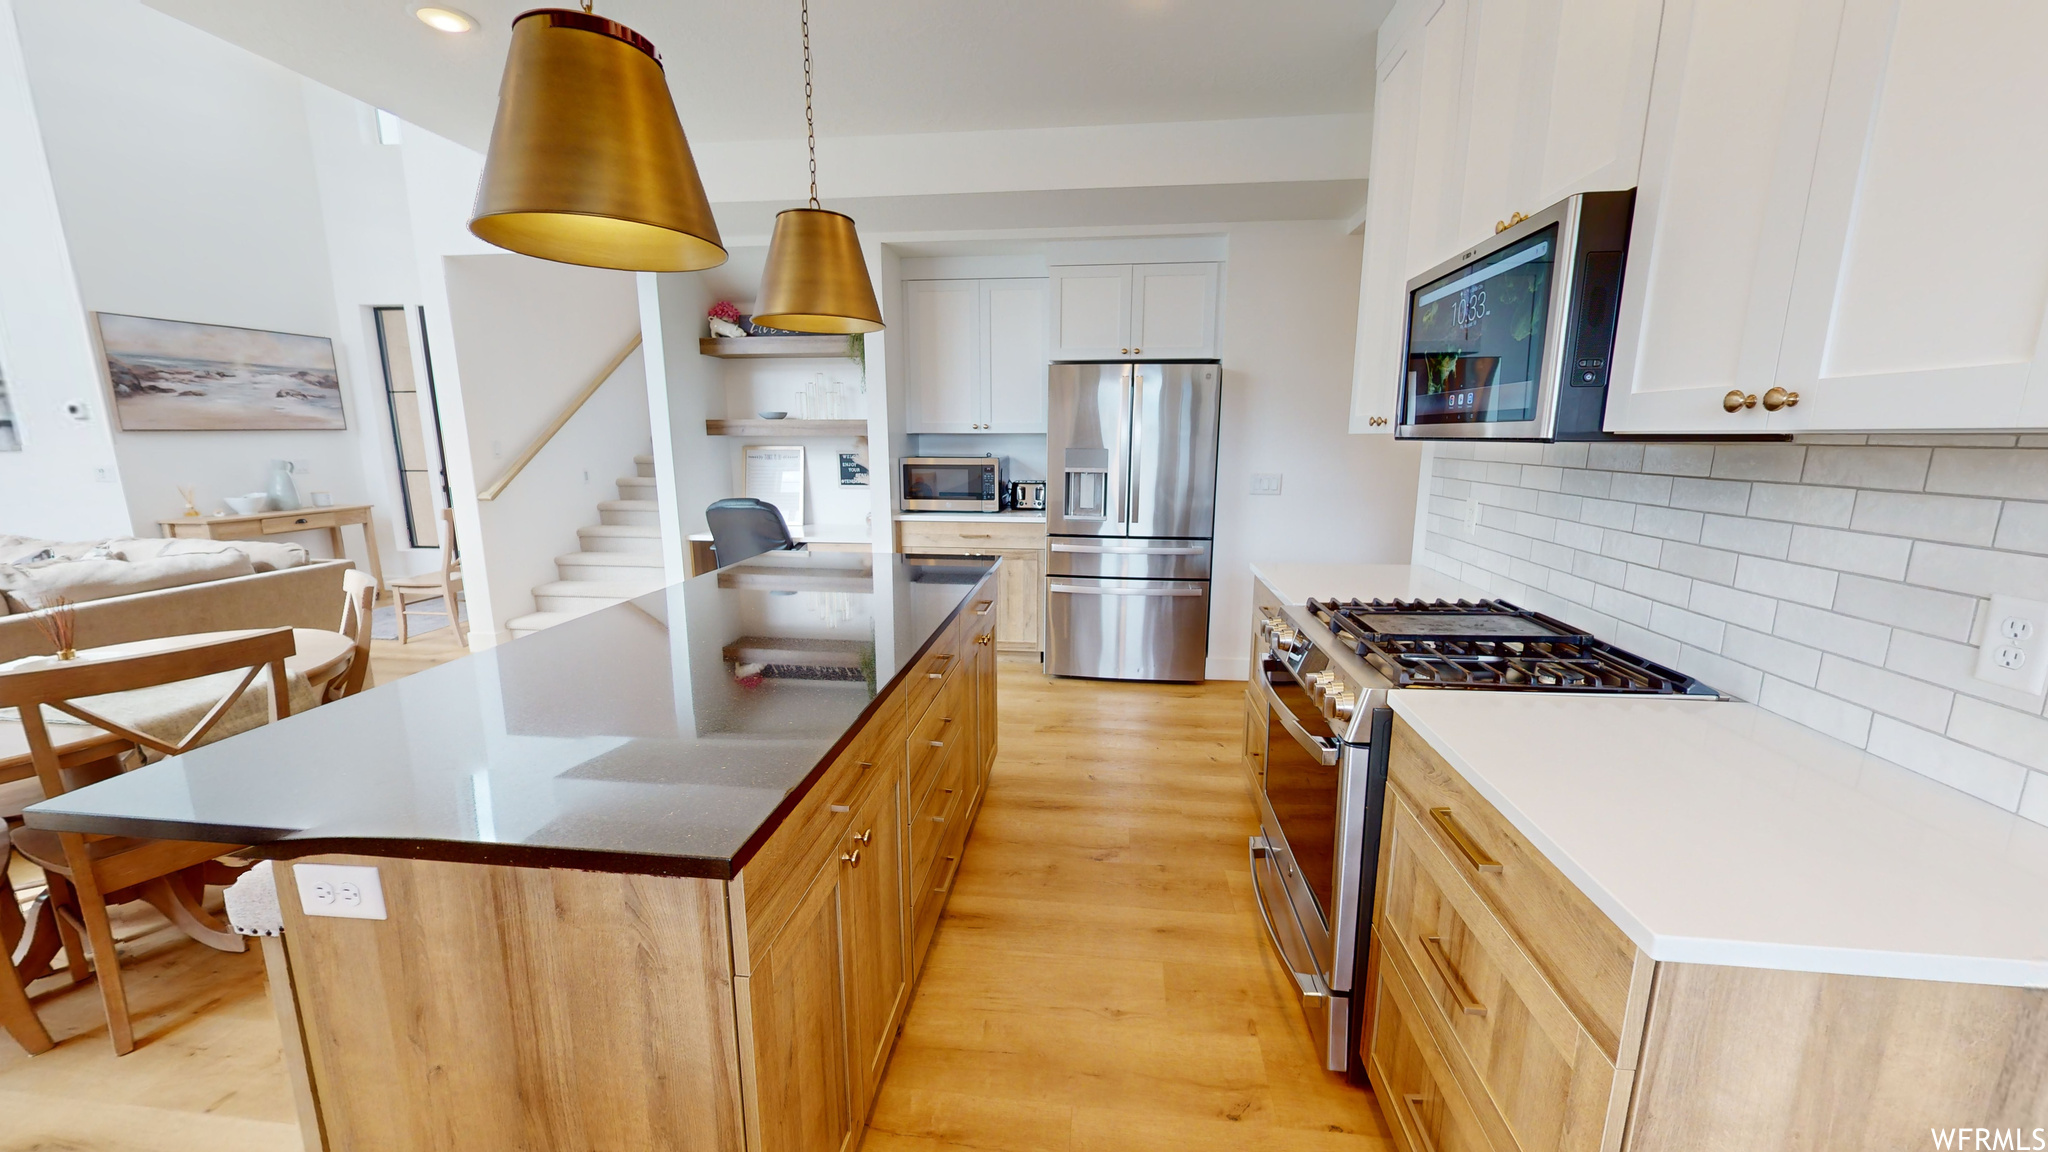 Kitchen featuring light hardwood / wood-style flooring, a center island, white cabinets, decorative light fixtures, and appliances with stainless steel finishes